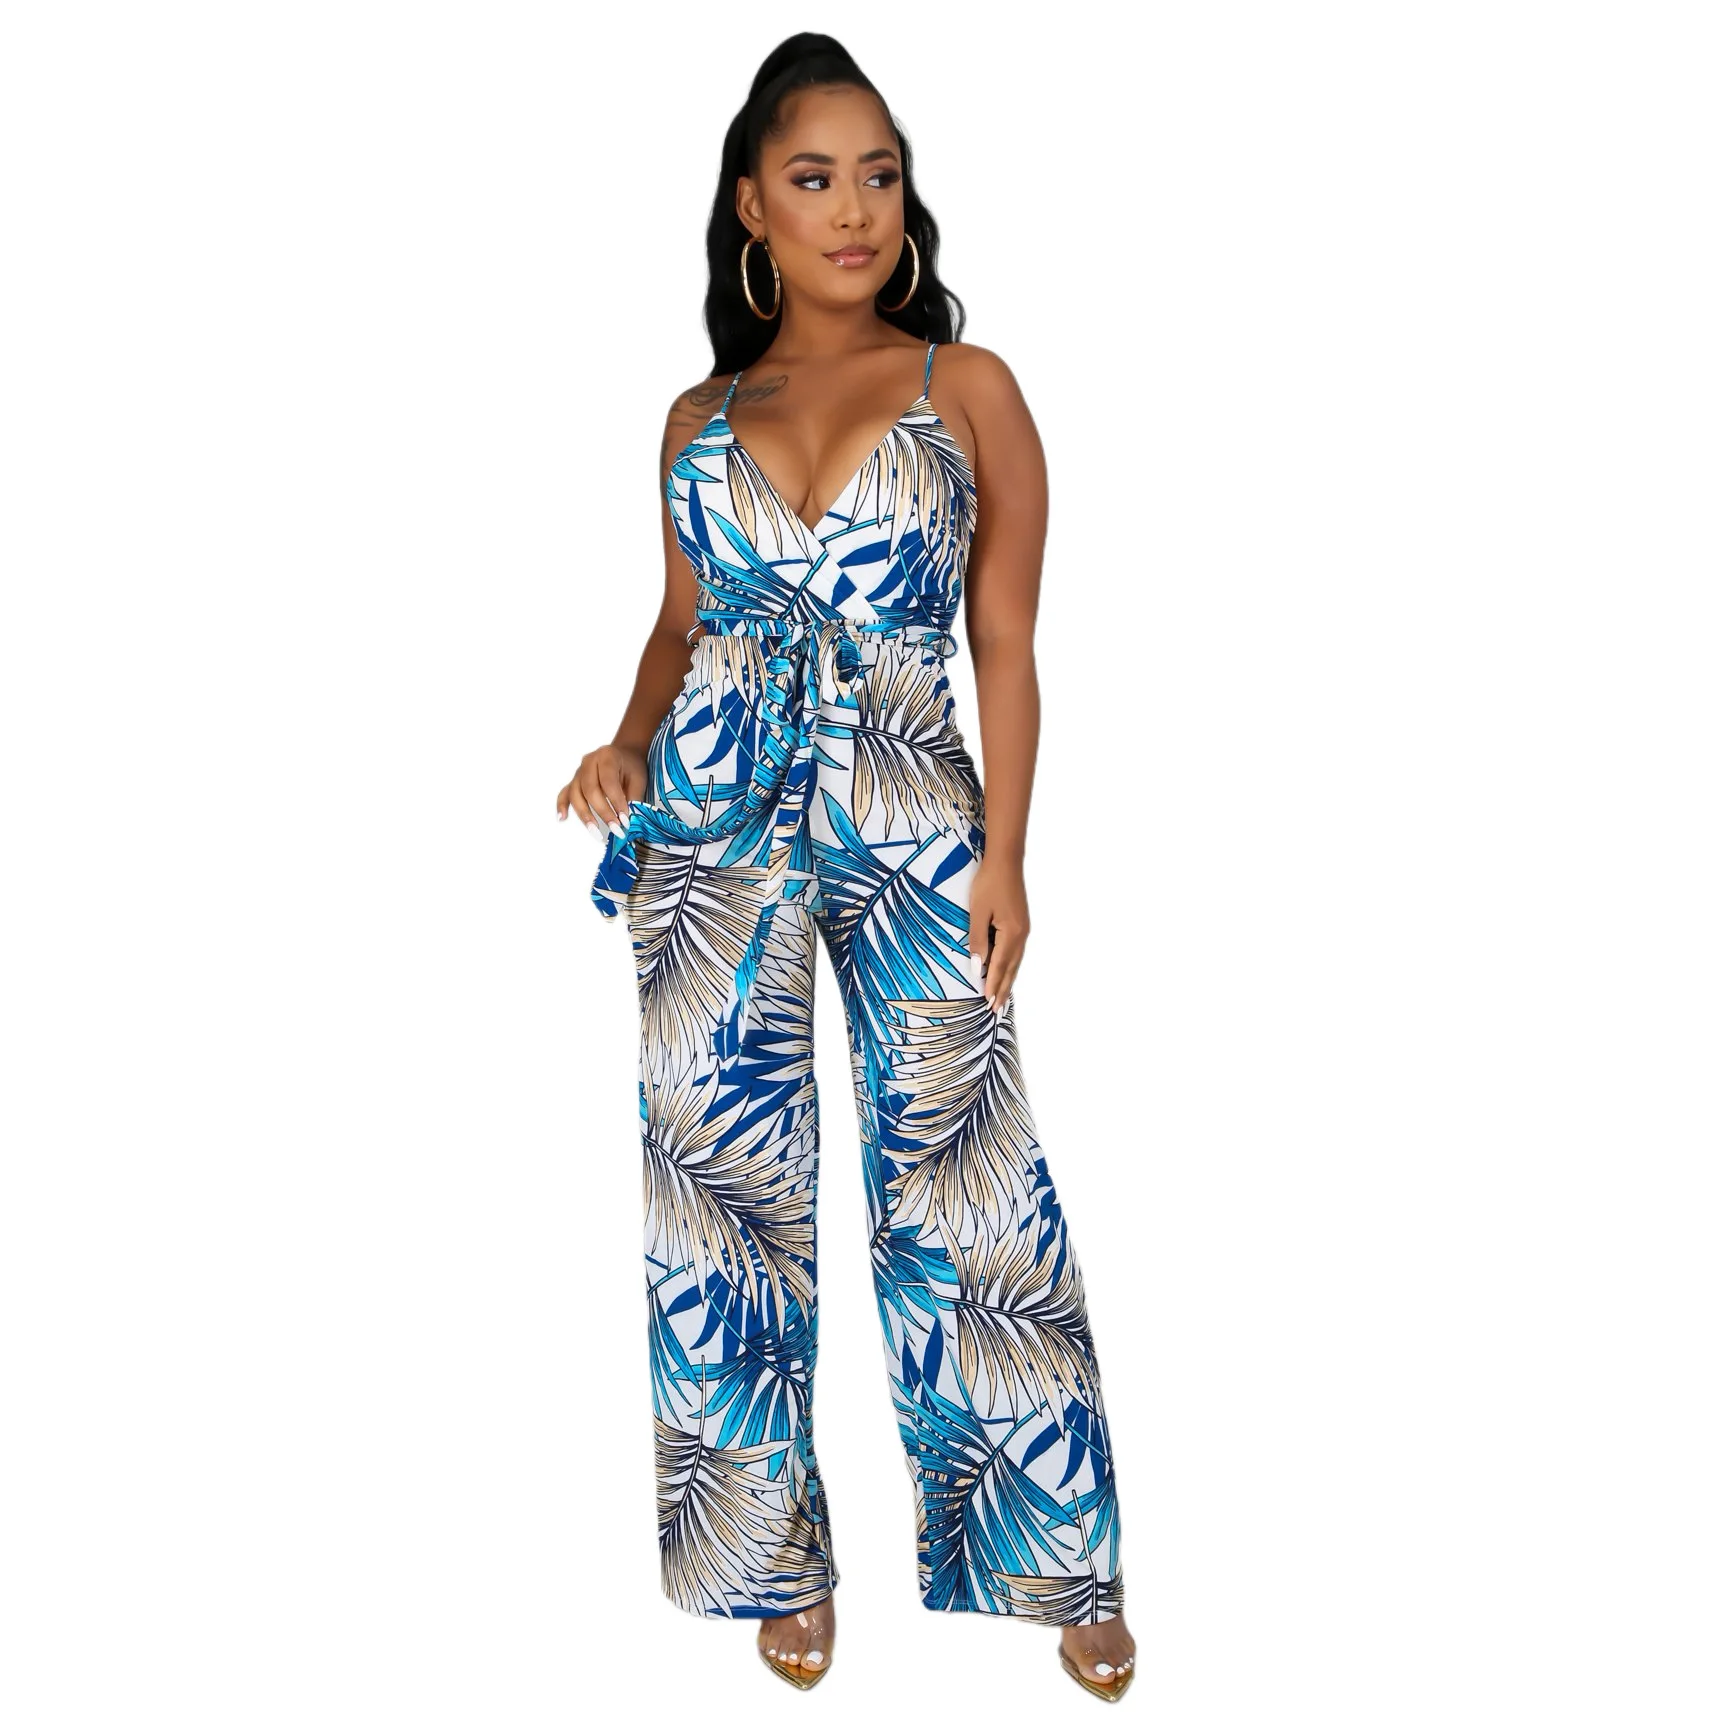 

Women's Casual Slim Floral Printed V-Neck Halter Camisole Sleeveless Jumpsuit